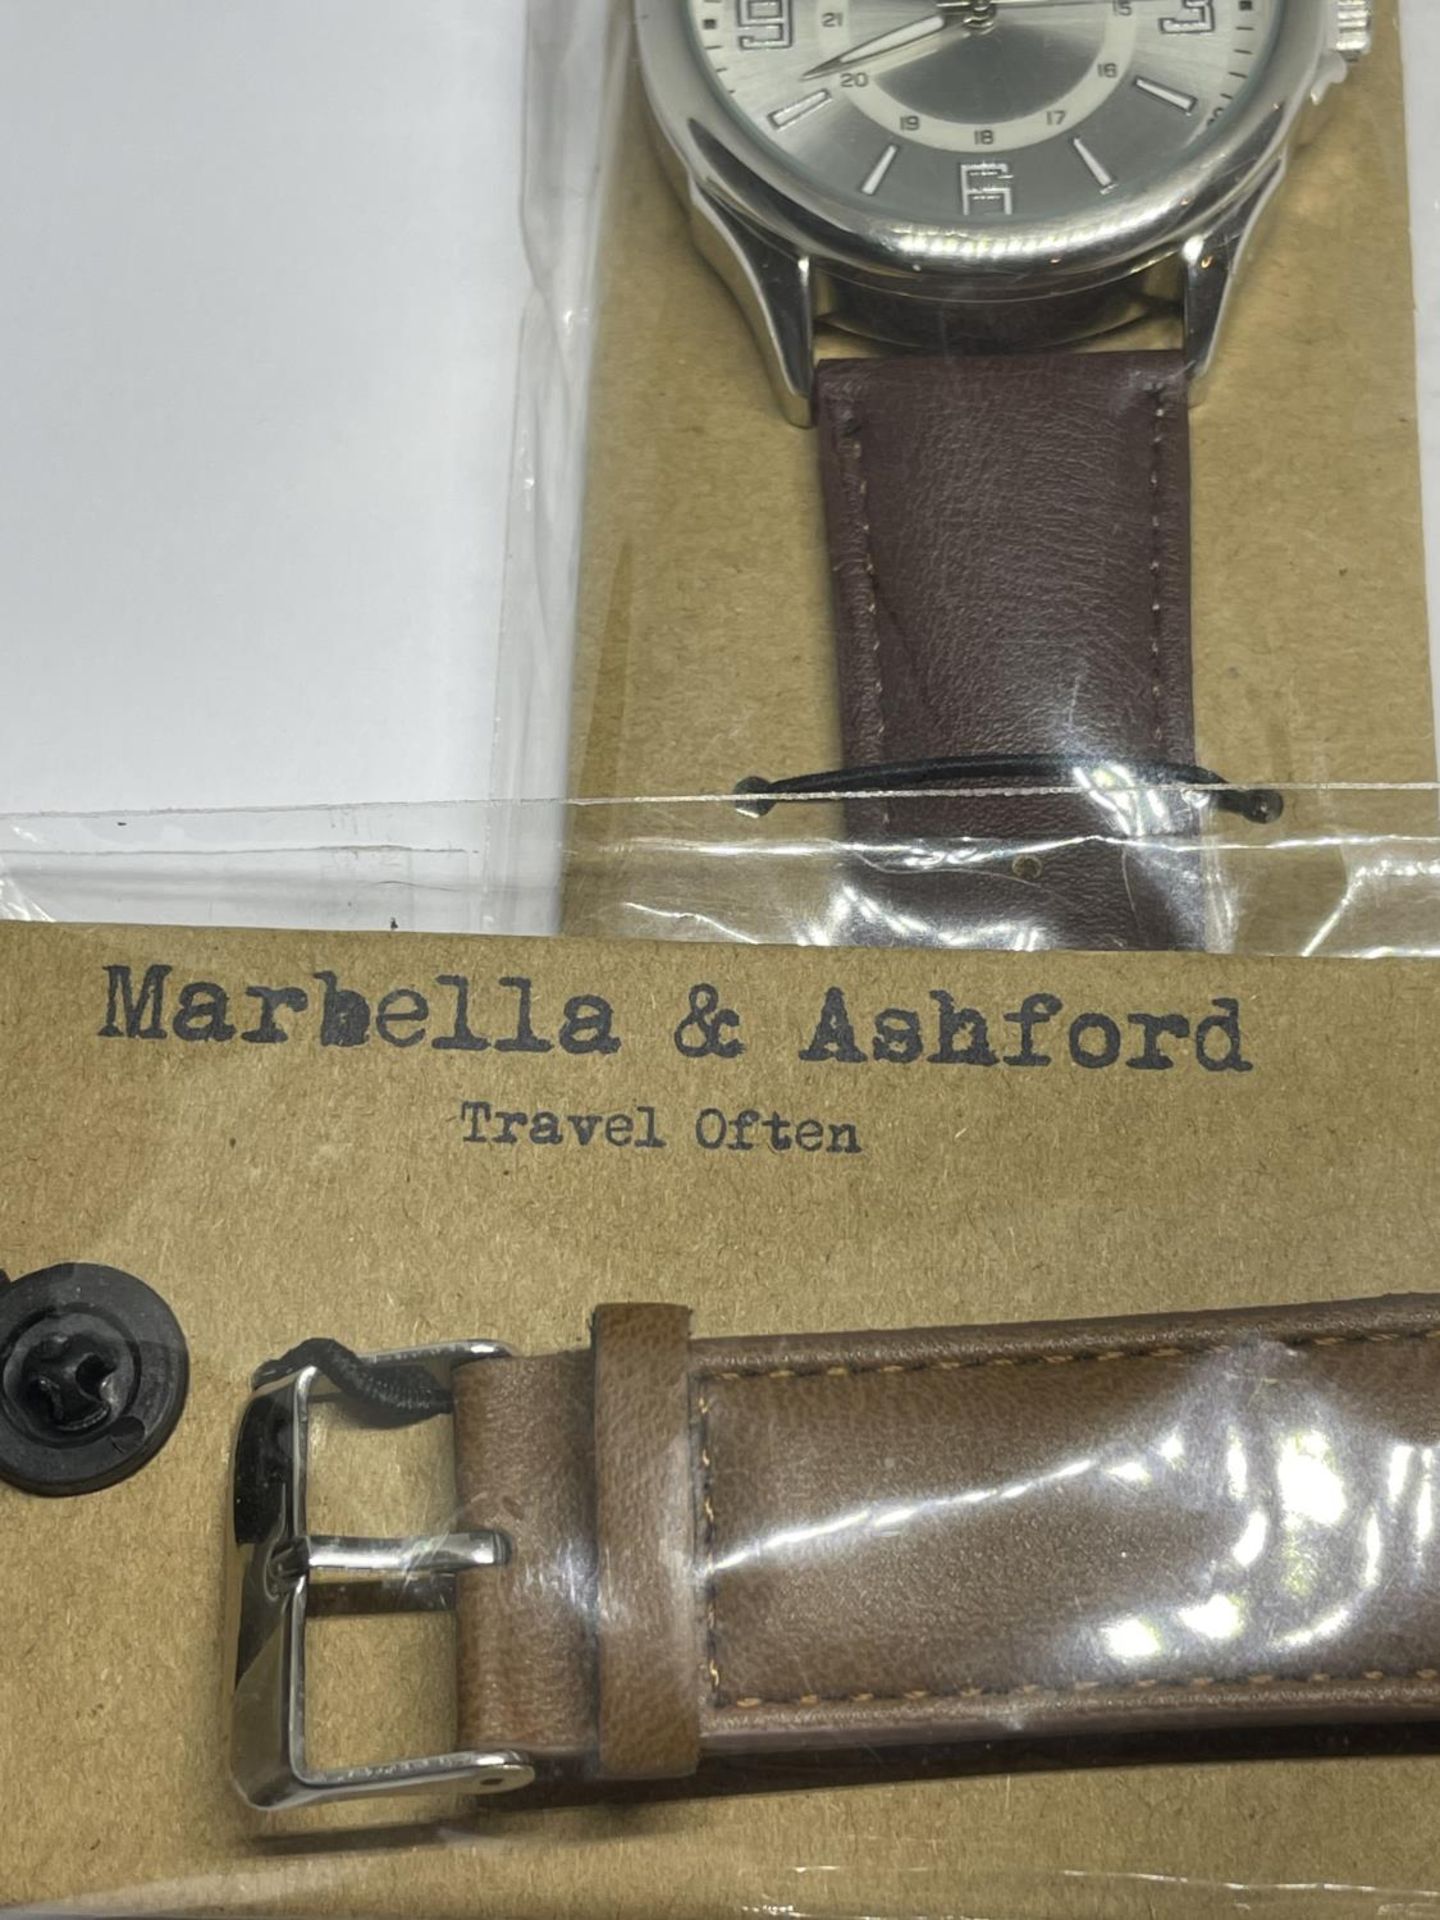 TWO NEW MARBELLA AND ASHFORD WRIST WATCHES - Image 4 of 4